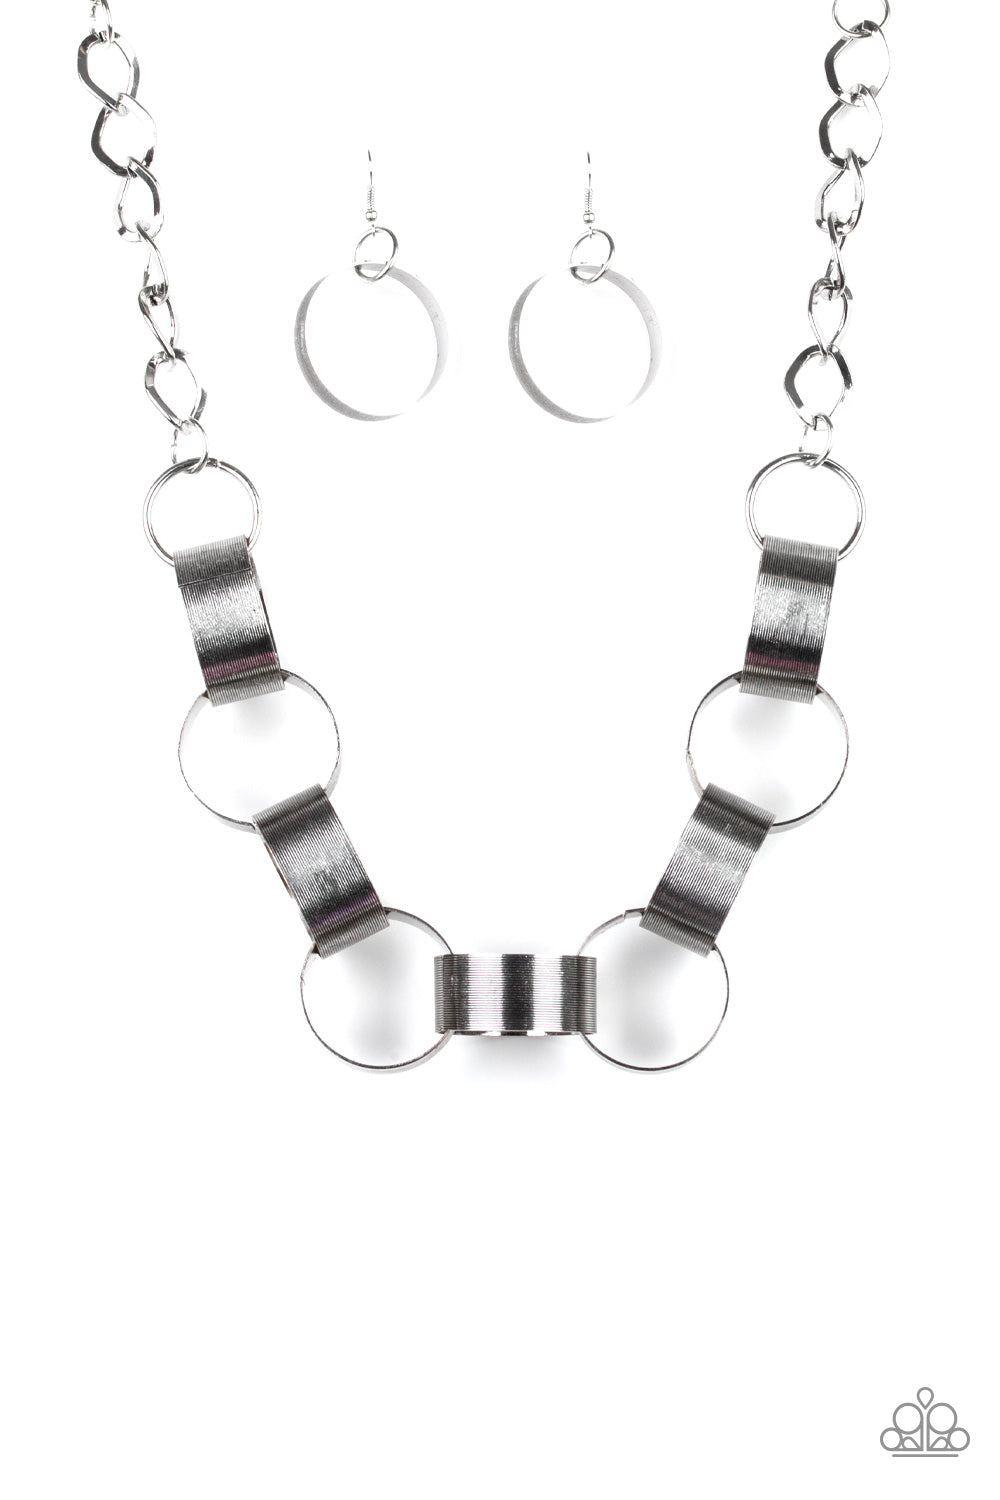 Paparazzi Accessories - Big Hit #N516 - Silver Necklace